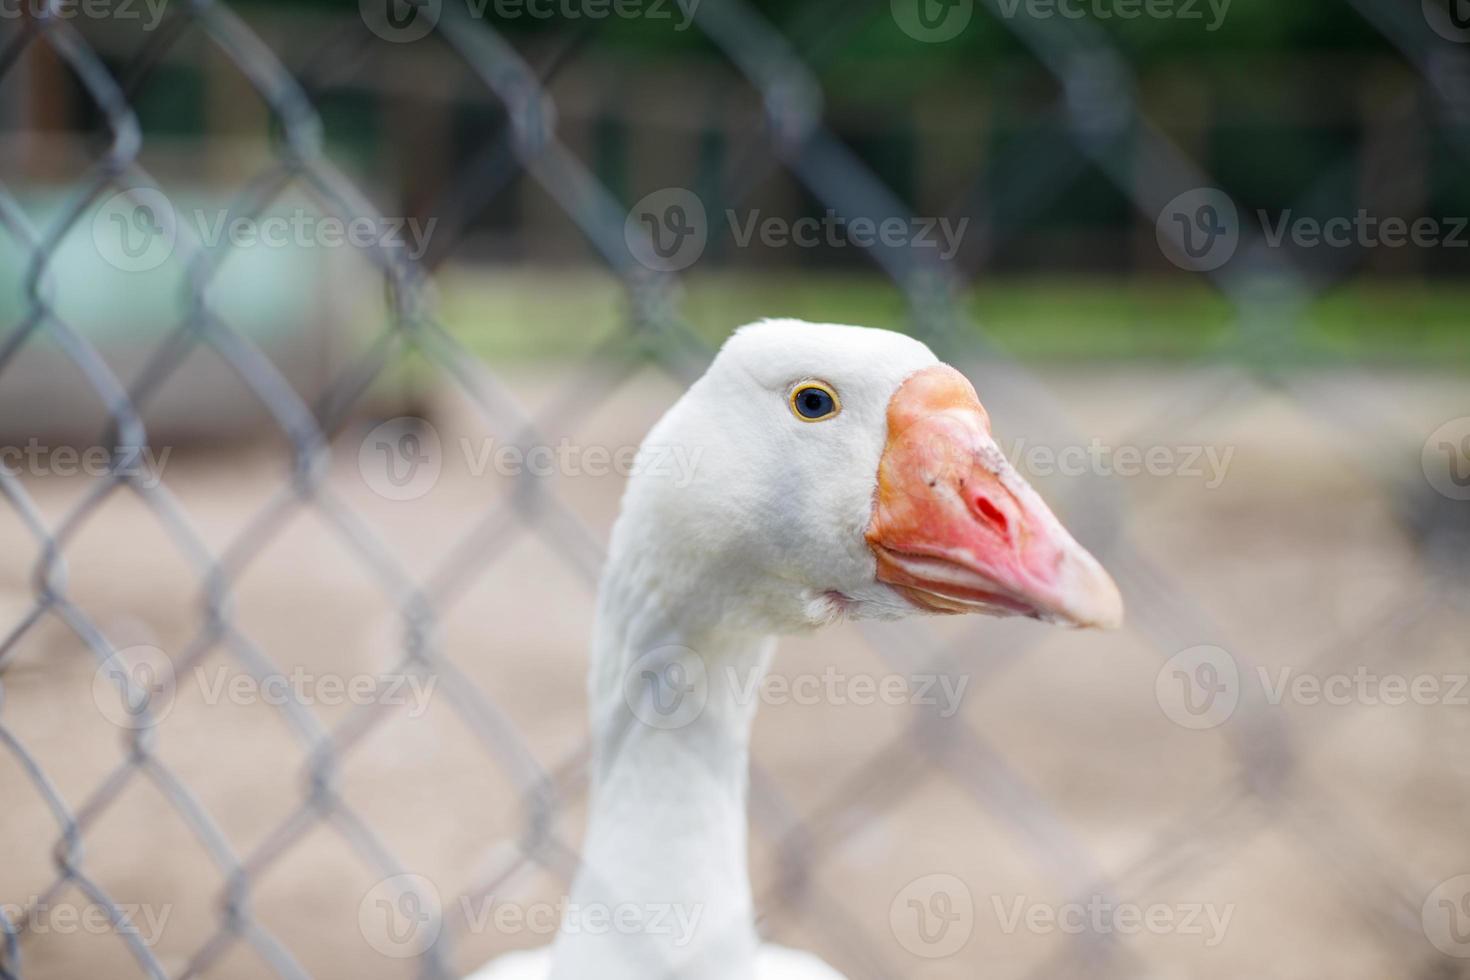 geese behind the fence. close-up portrait of a goose photo